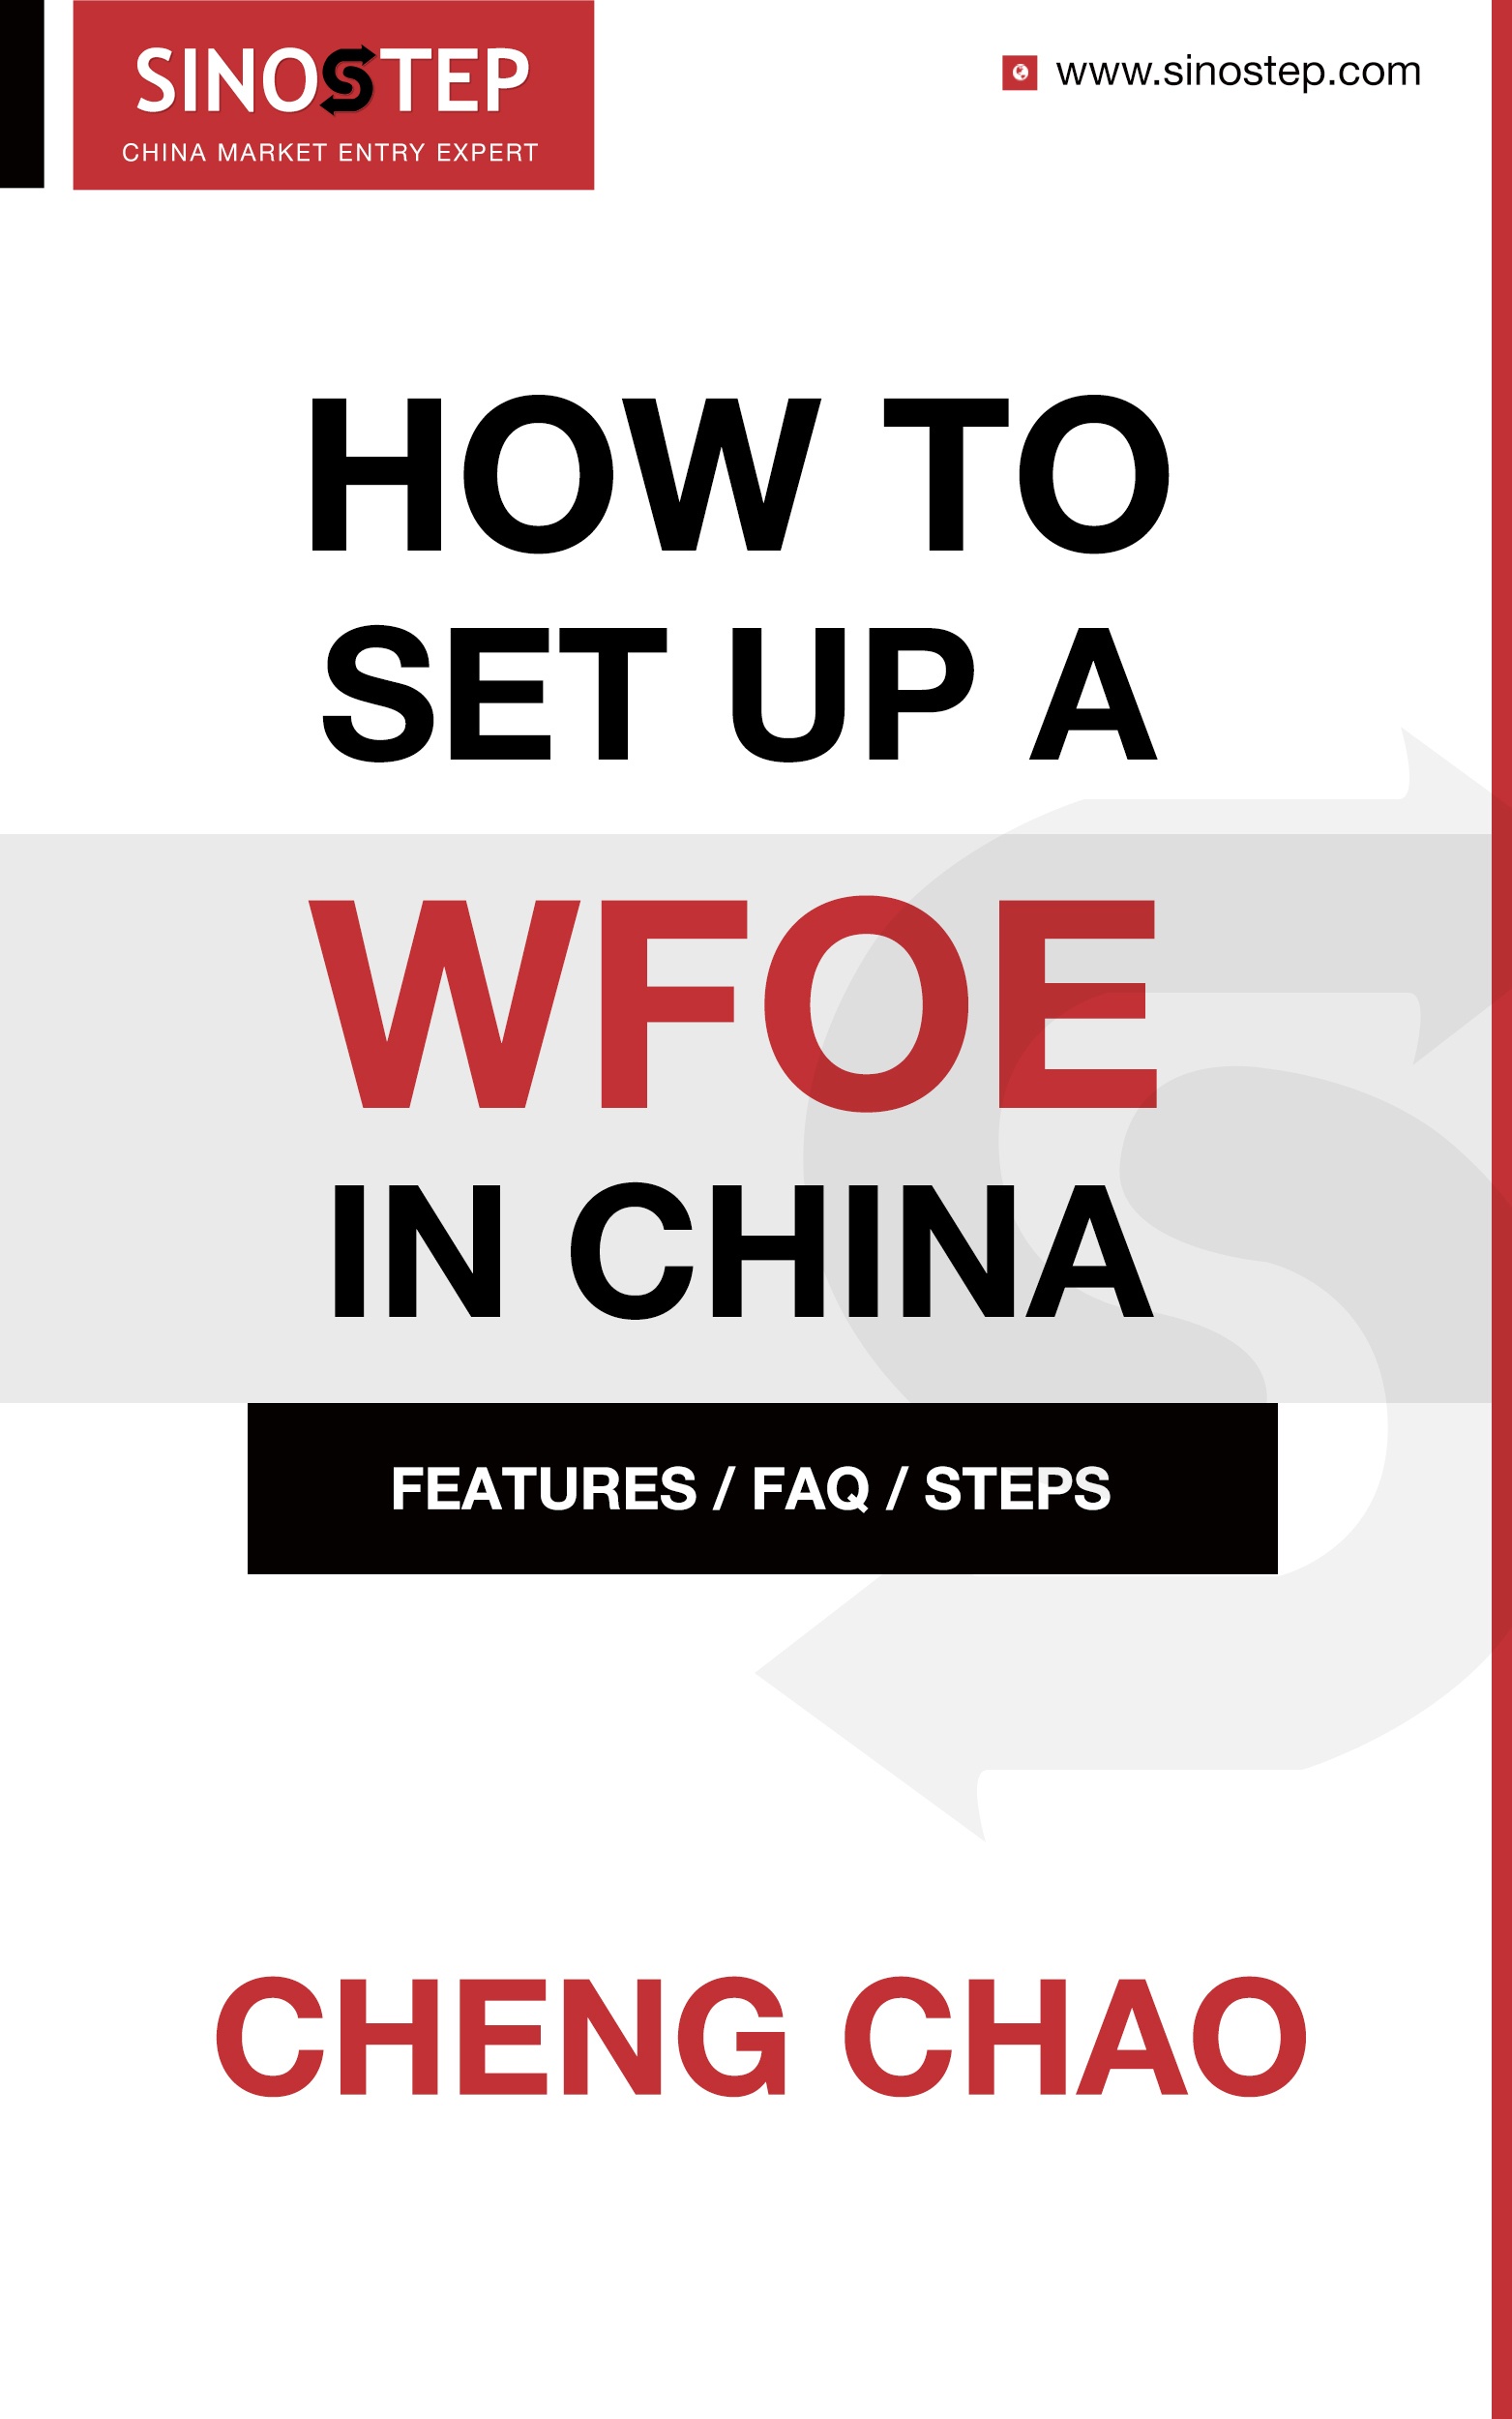 How to set up a WFOE in China